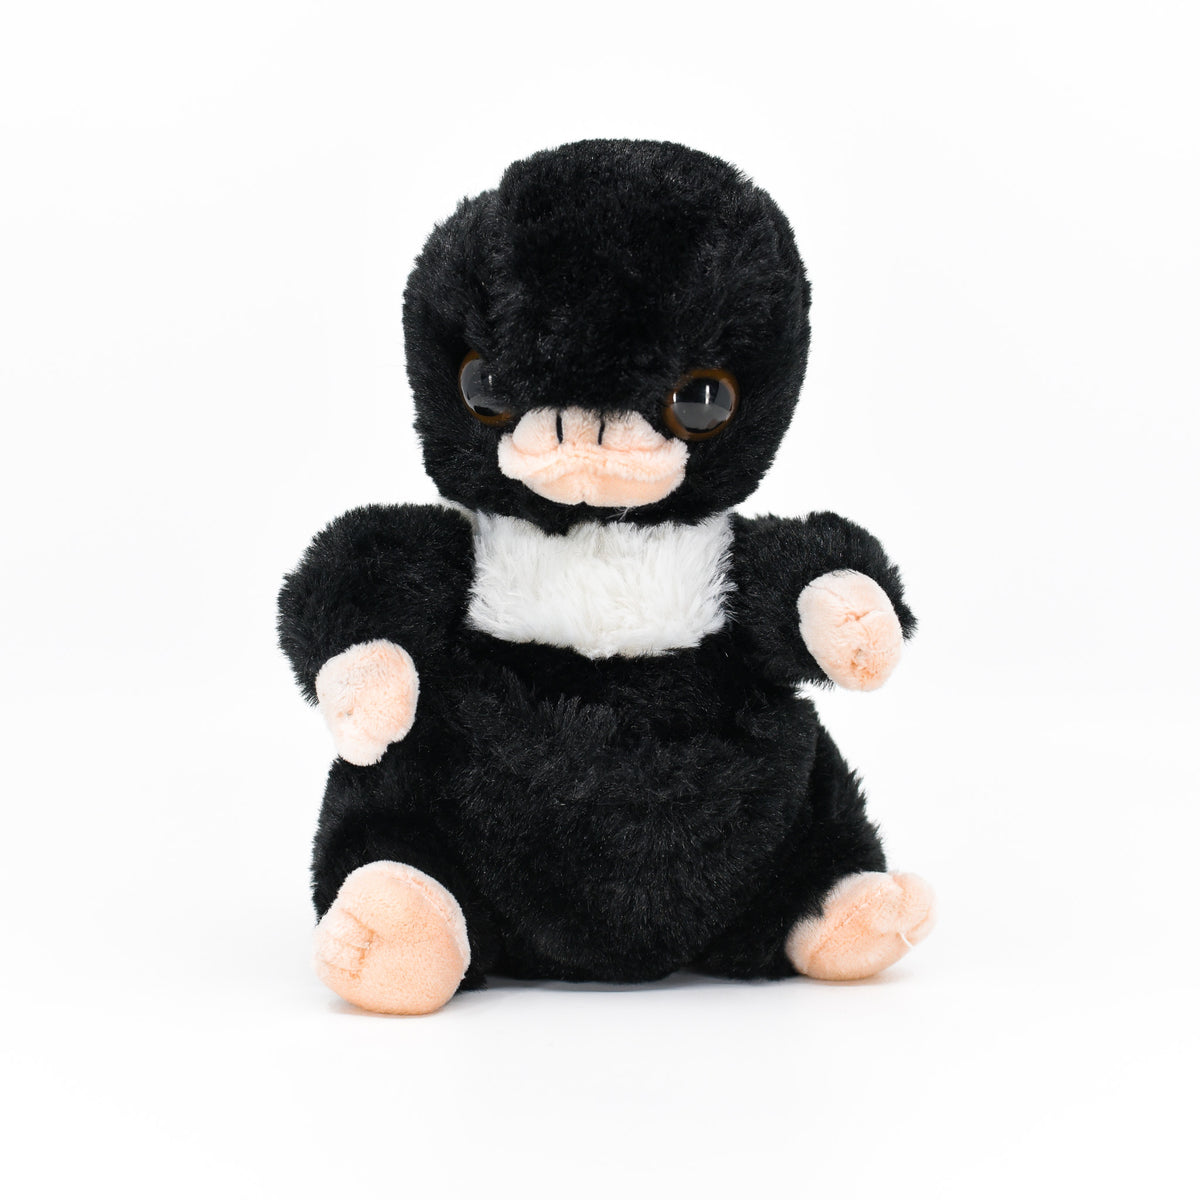 Thief Plush from LitJoy Crate